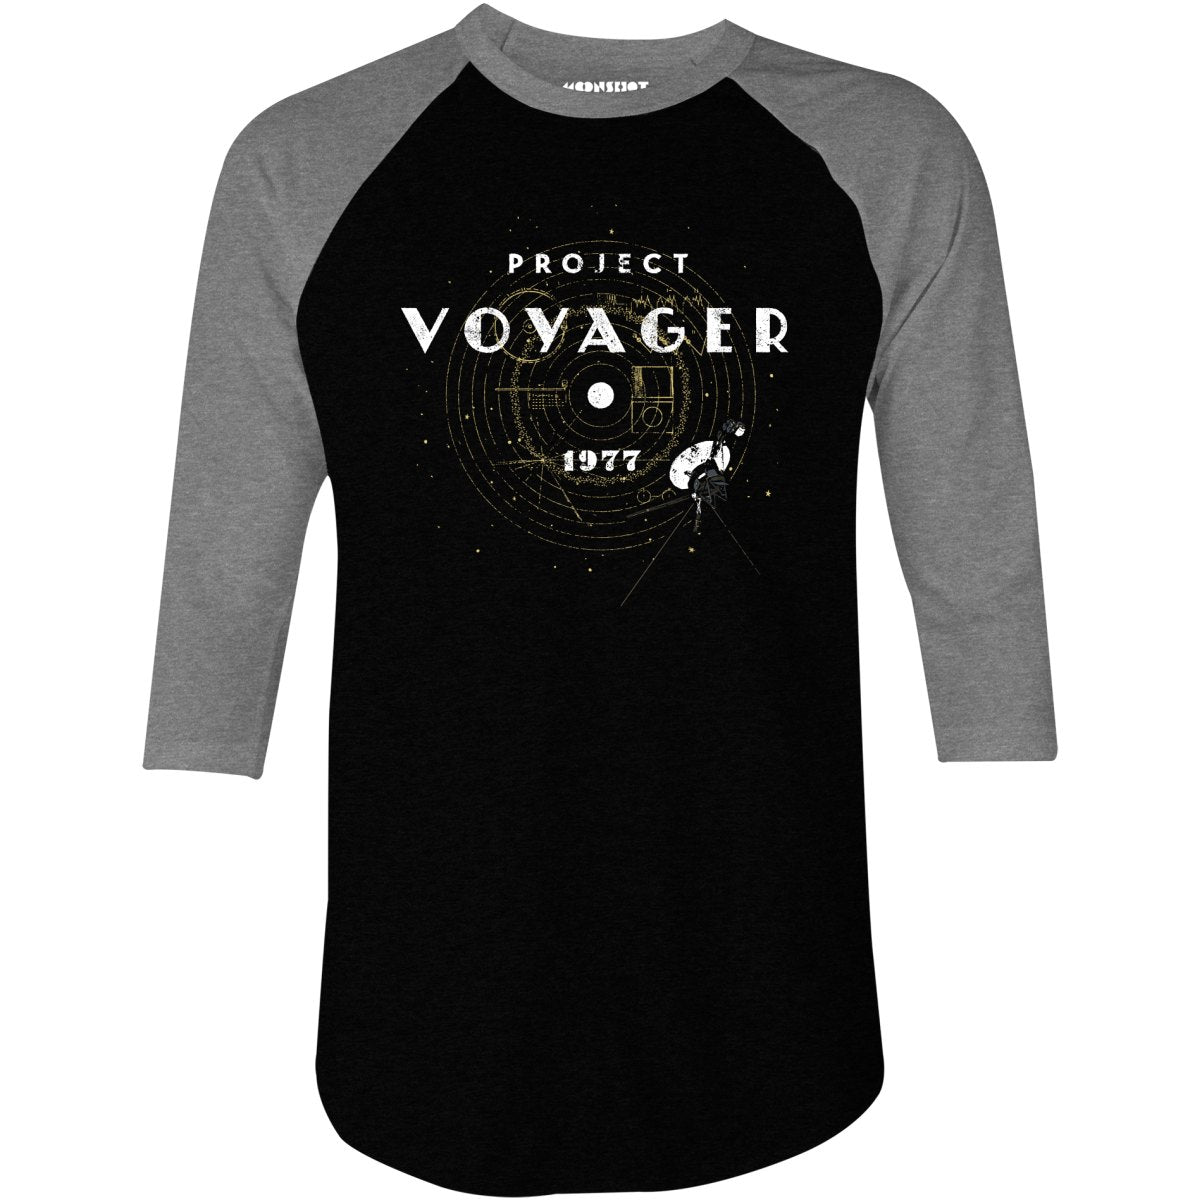 Project Voyager Mission - Golden Record - 3/4 Sleeve Raglan T-Shirt